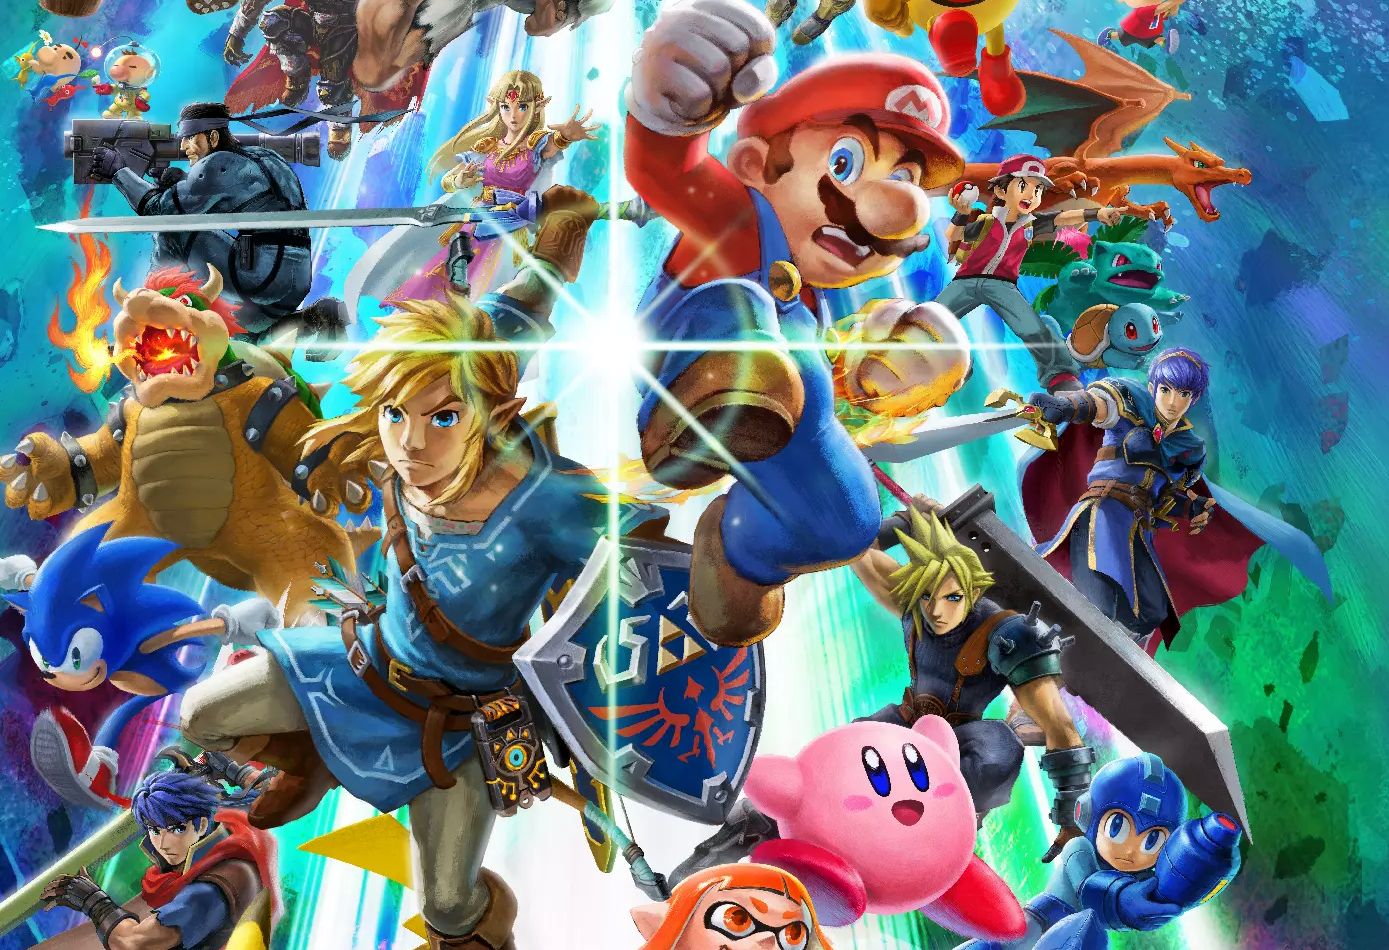 Image for Yes, Super Smash Bros. Ultimate is rather like an enhanced port - but it's amazing, so who cares?